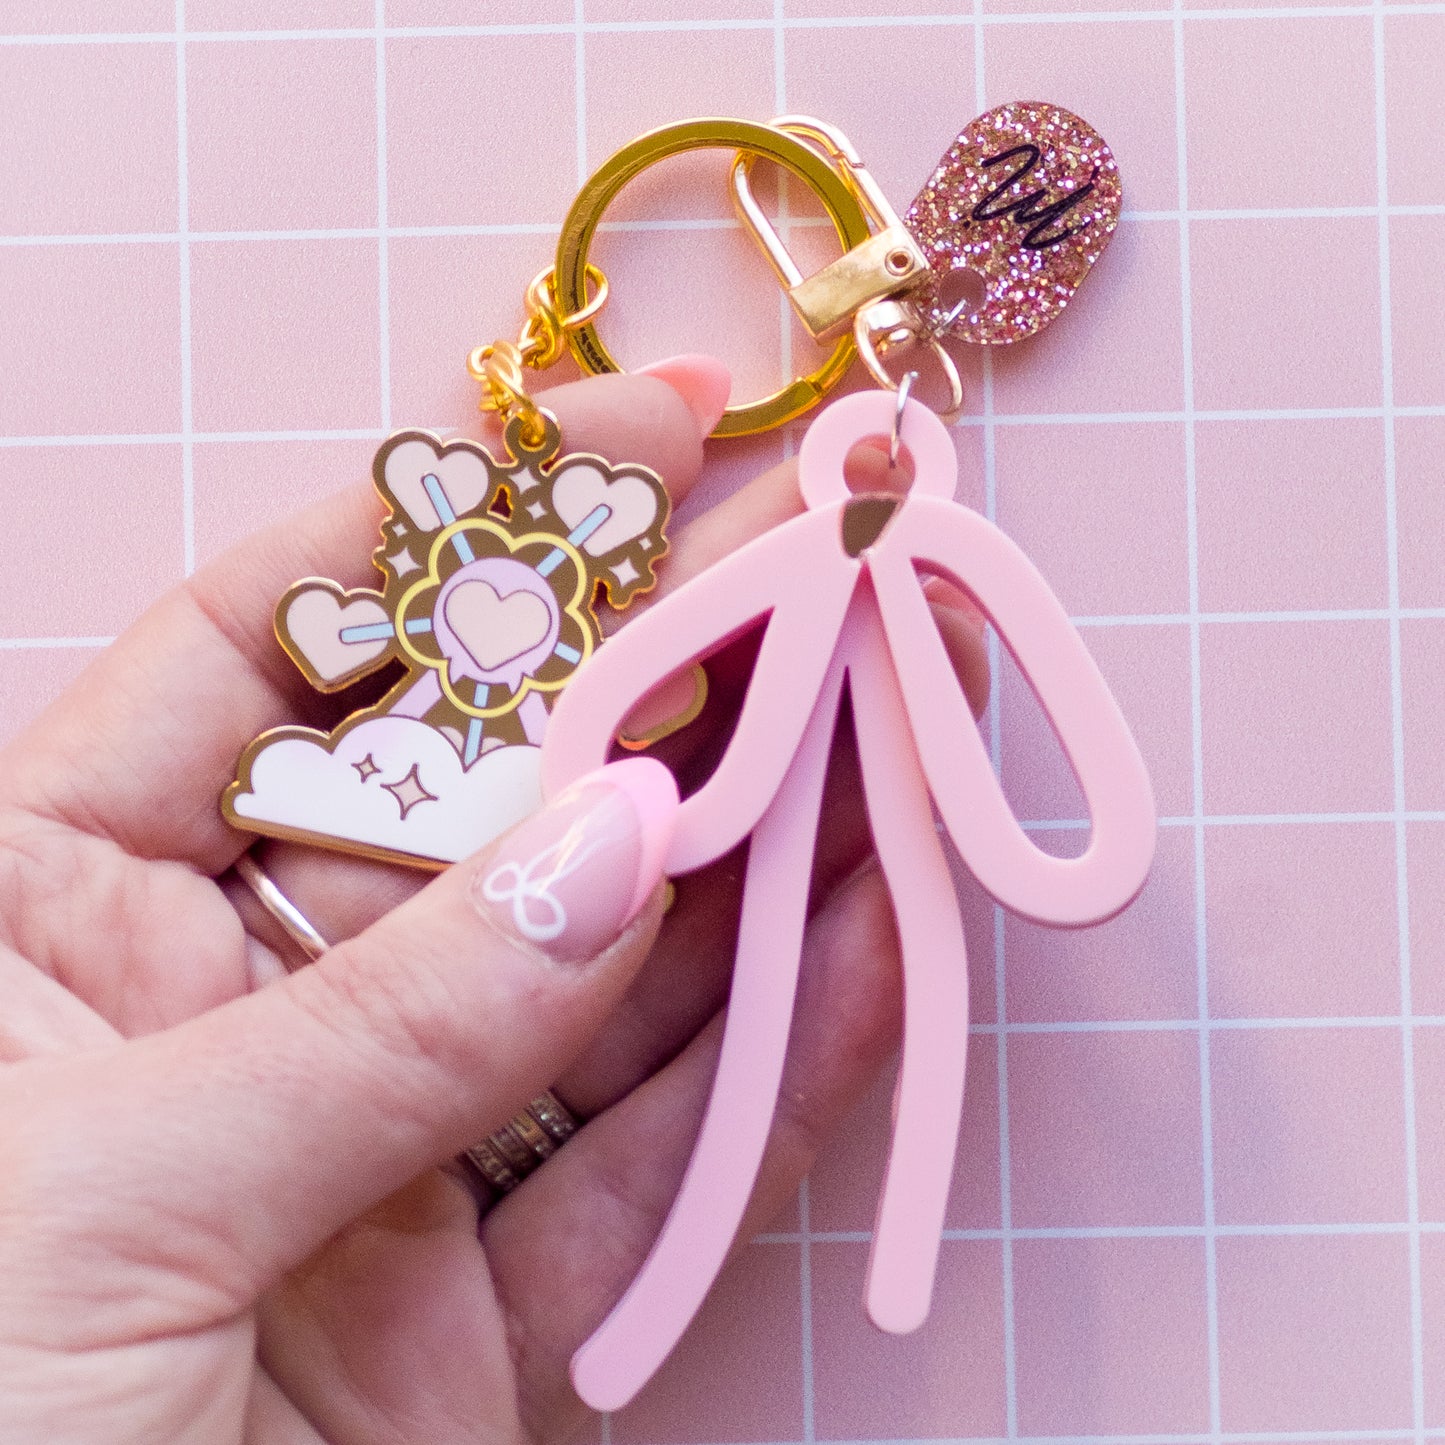 Bow Keychain, Bow Gift, Bow Bag Charm, Gift for girls, Pastel keychain, Pastel Kawaii Gift